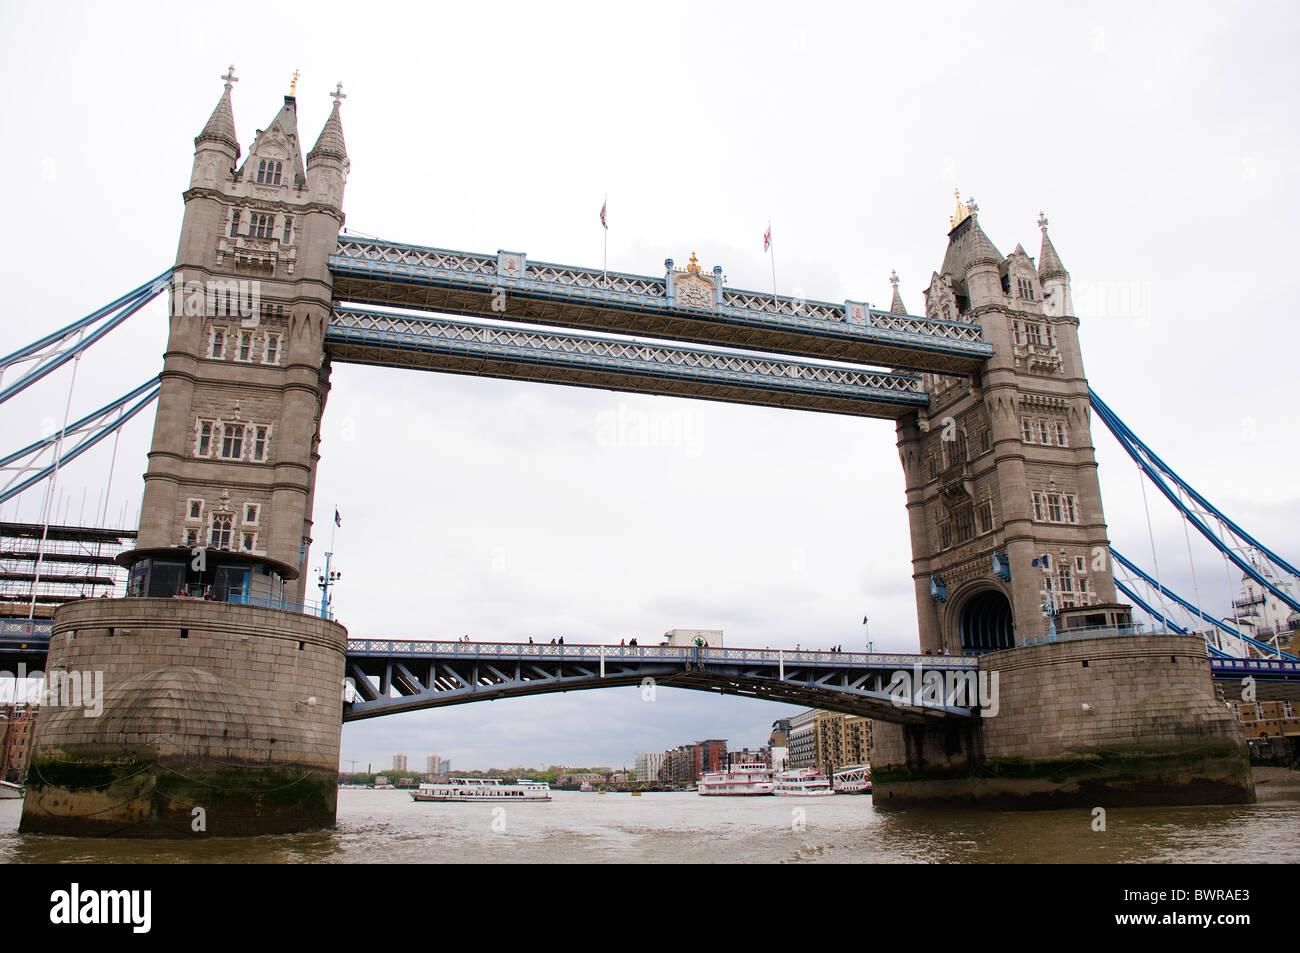 View of Tower Bridge from river below Stock Photo